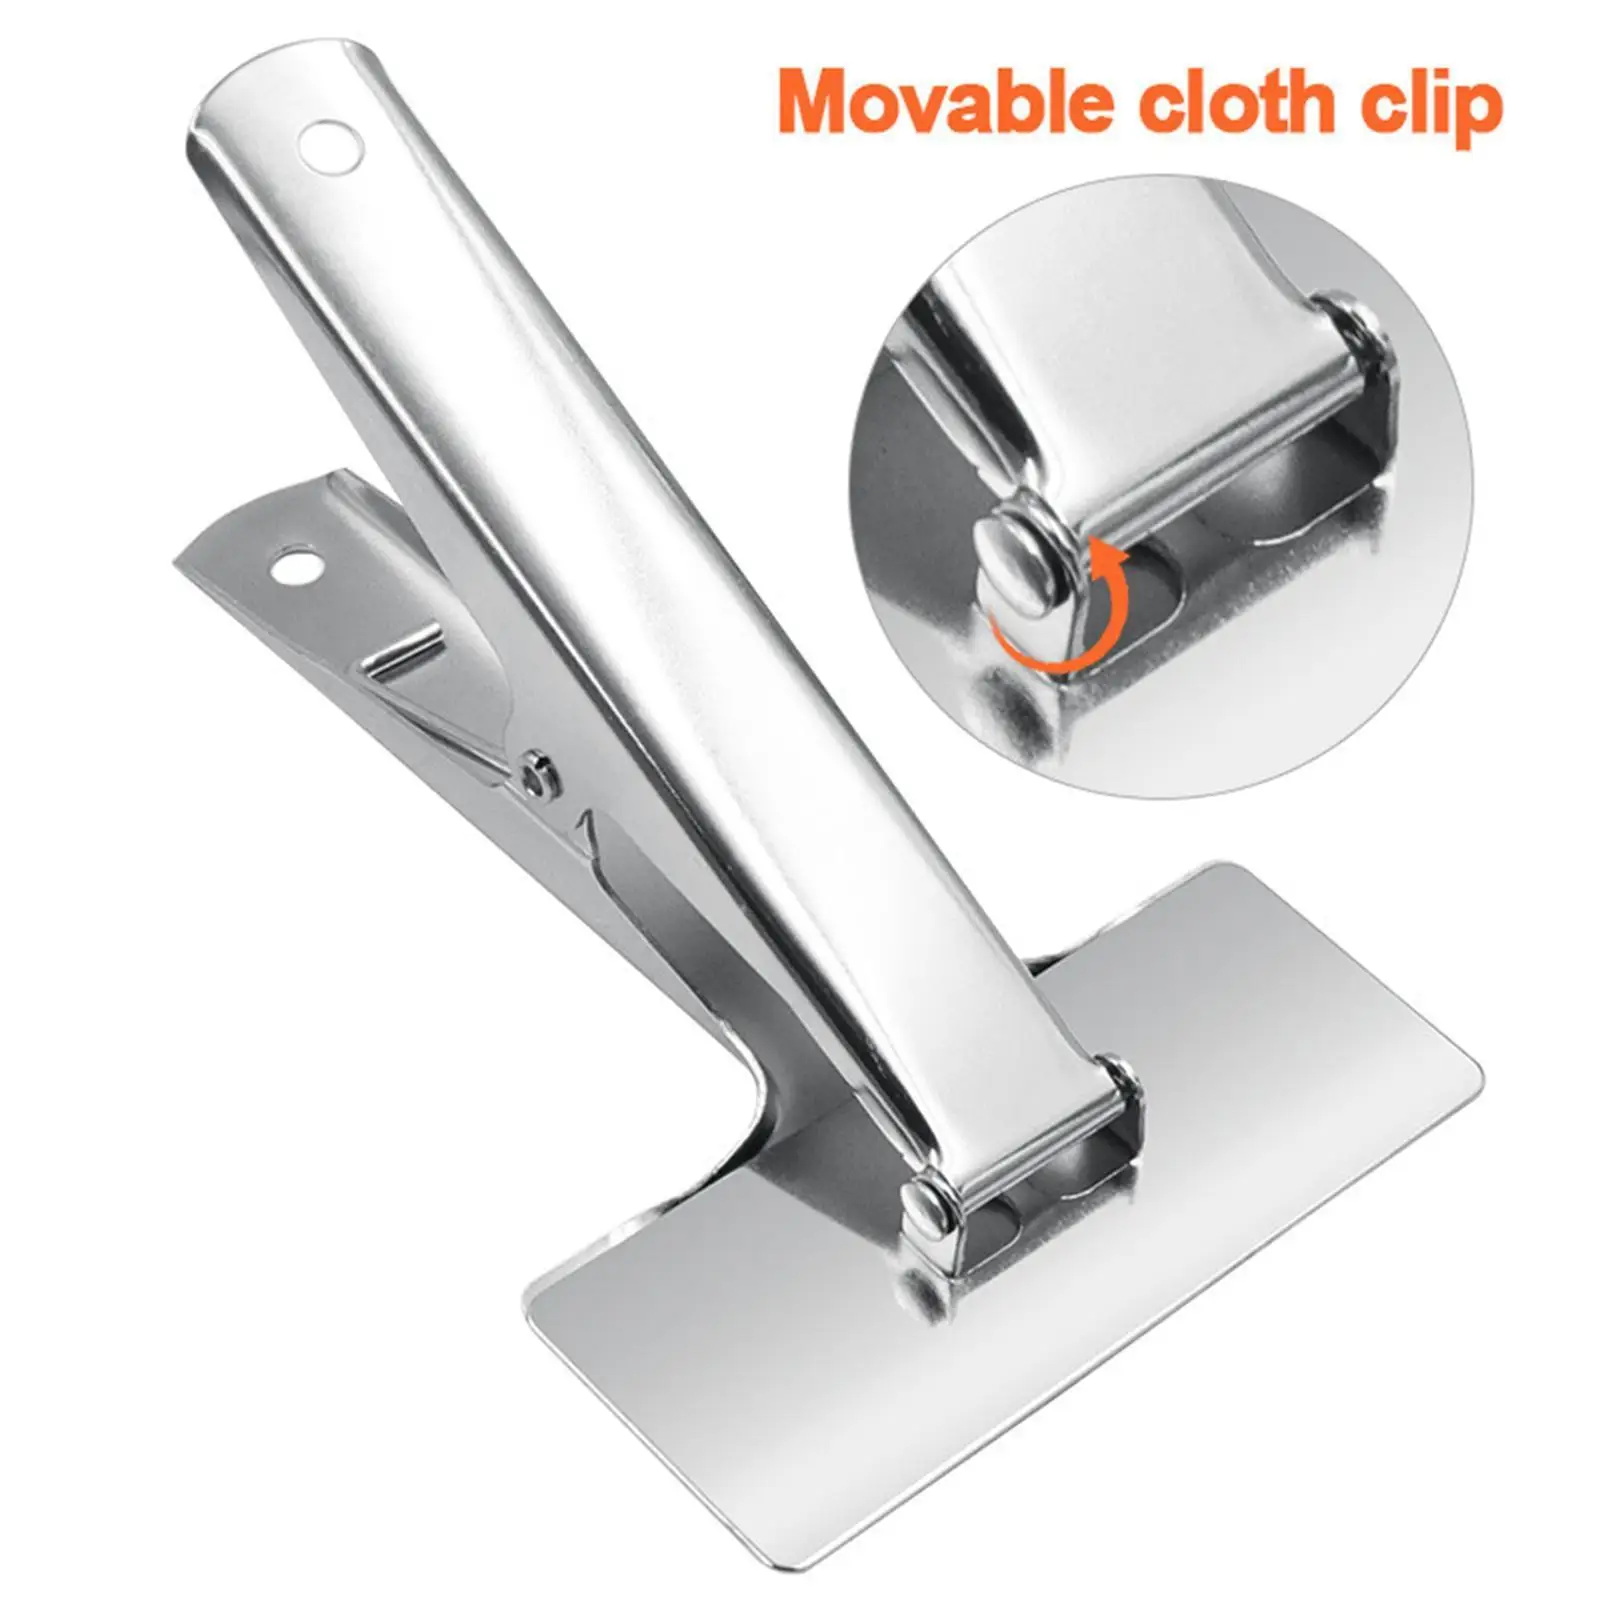 Garment Cutting Bed Cloth Fabric Clamp Movable Adjustable Hand-held Wide Jaw for Sewing Cutting Pattern Tool